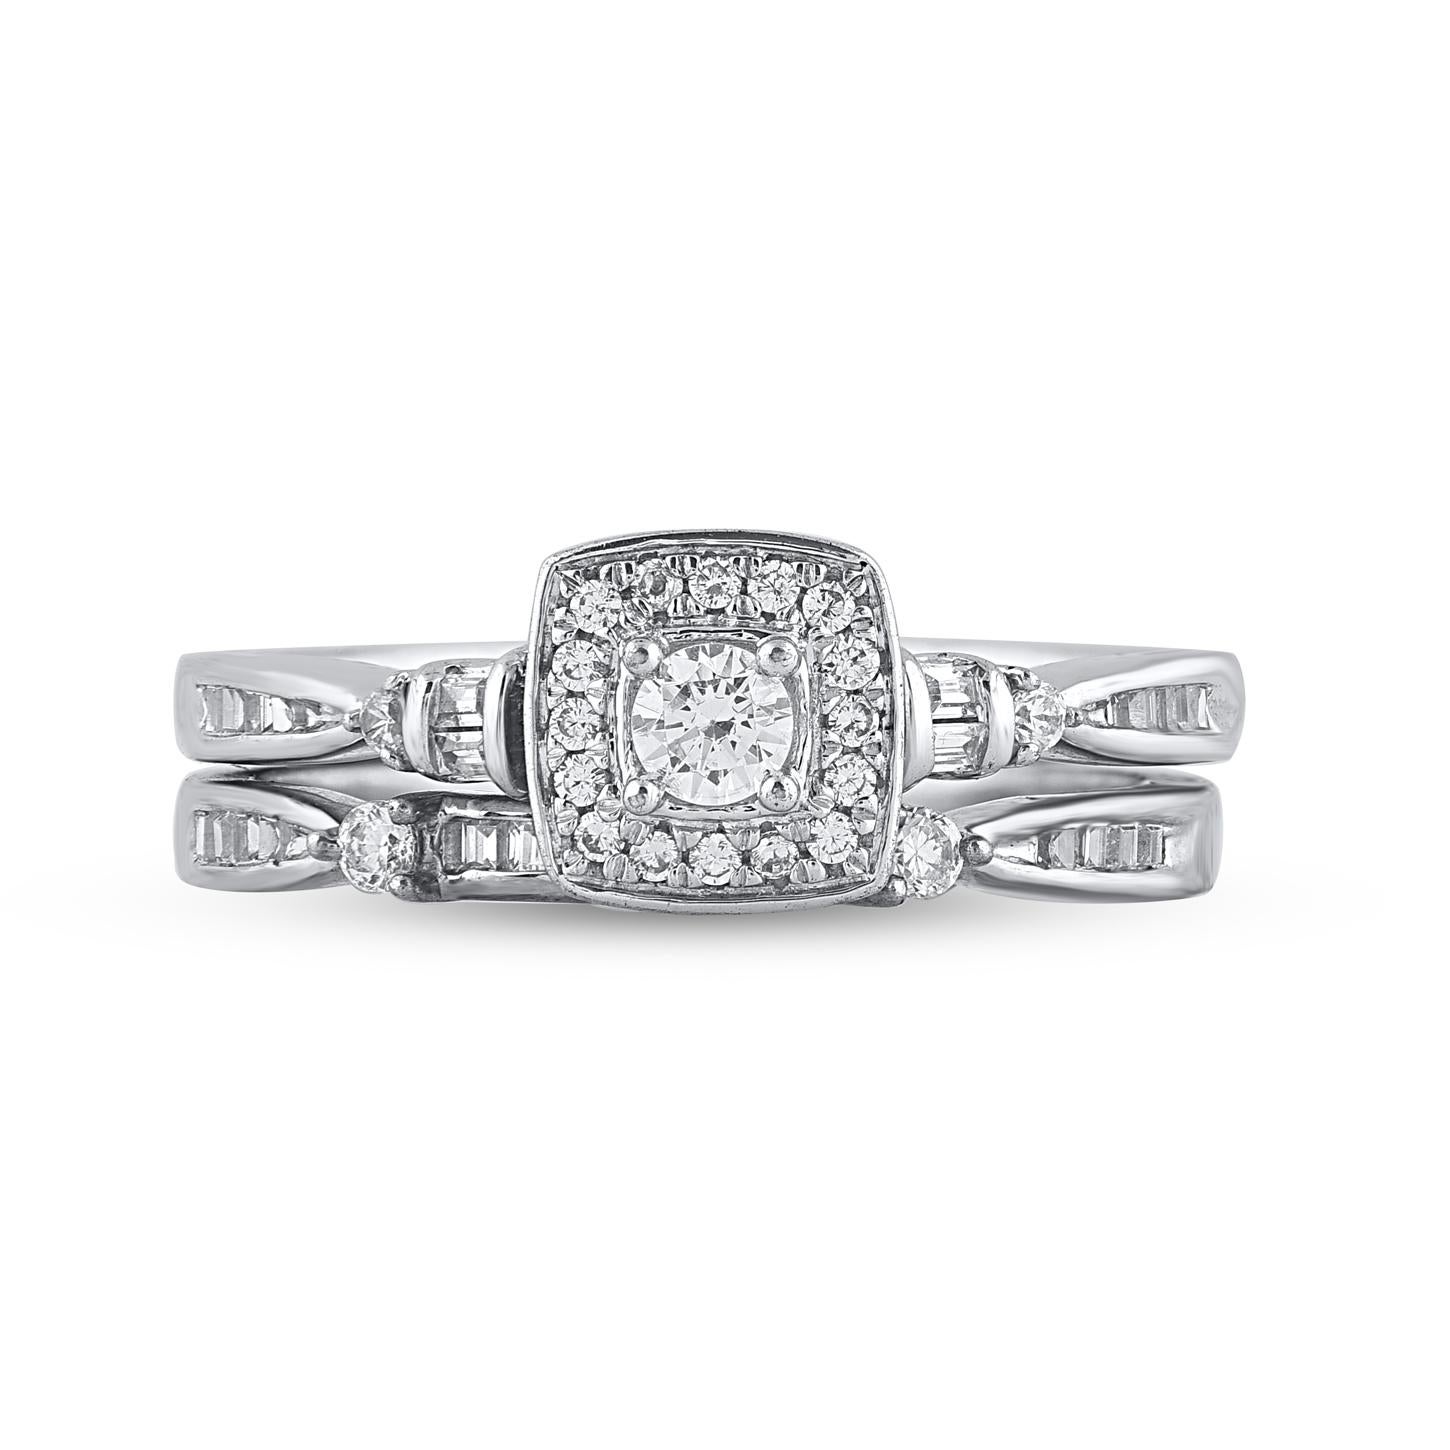 Express your love with this classic and traditional diamond bridal set. Crafted in 14 Karat white gold. This wedding ring features a sparkling 56 brilliant cut, single cut round diamonds and baguette cut diamonds beautifully set in prong, pave and